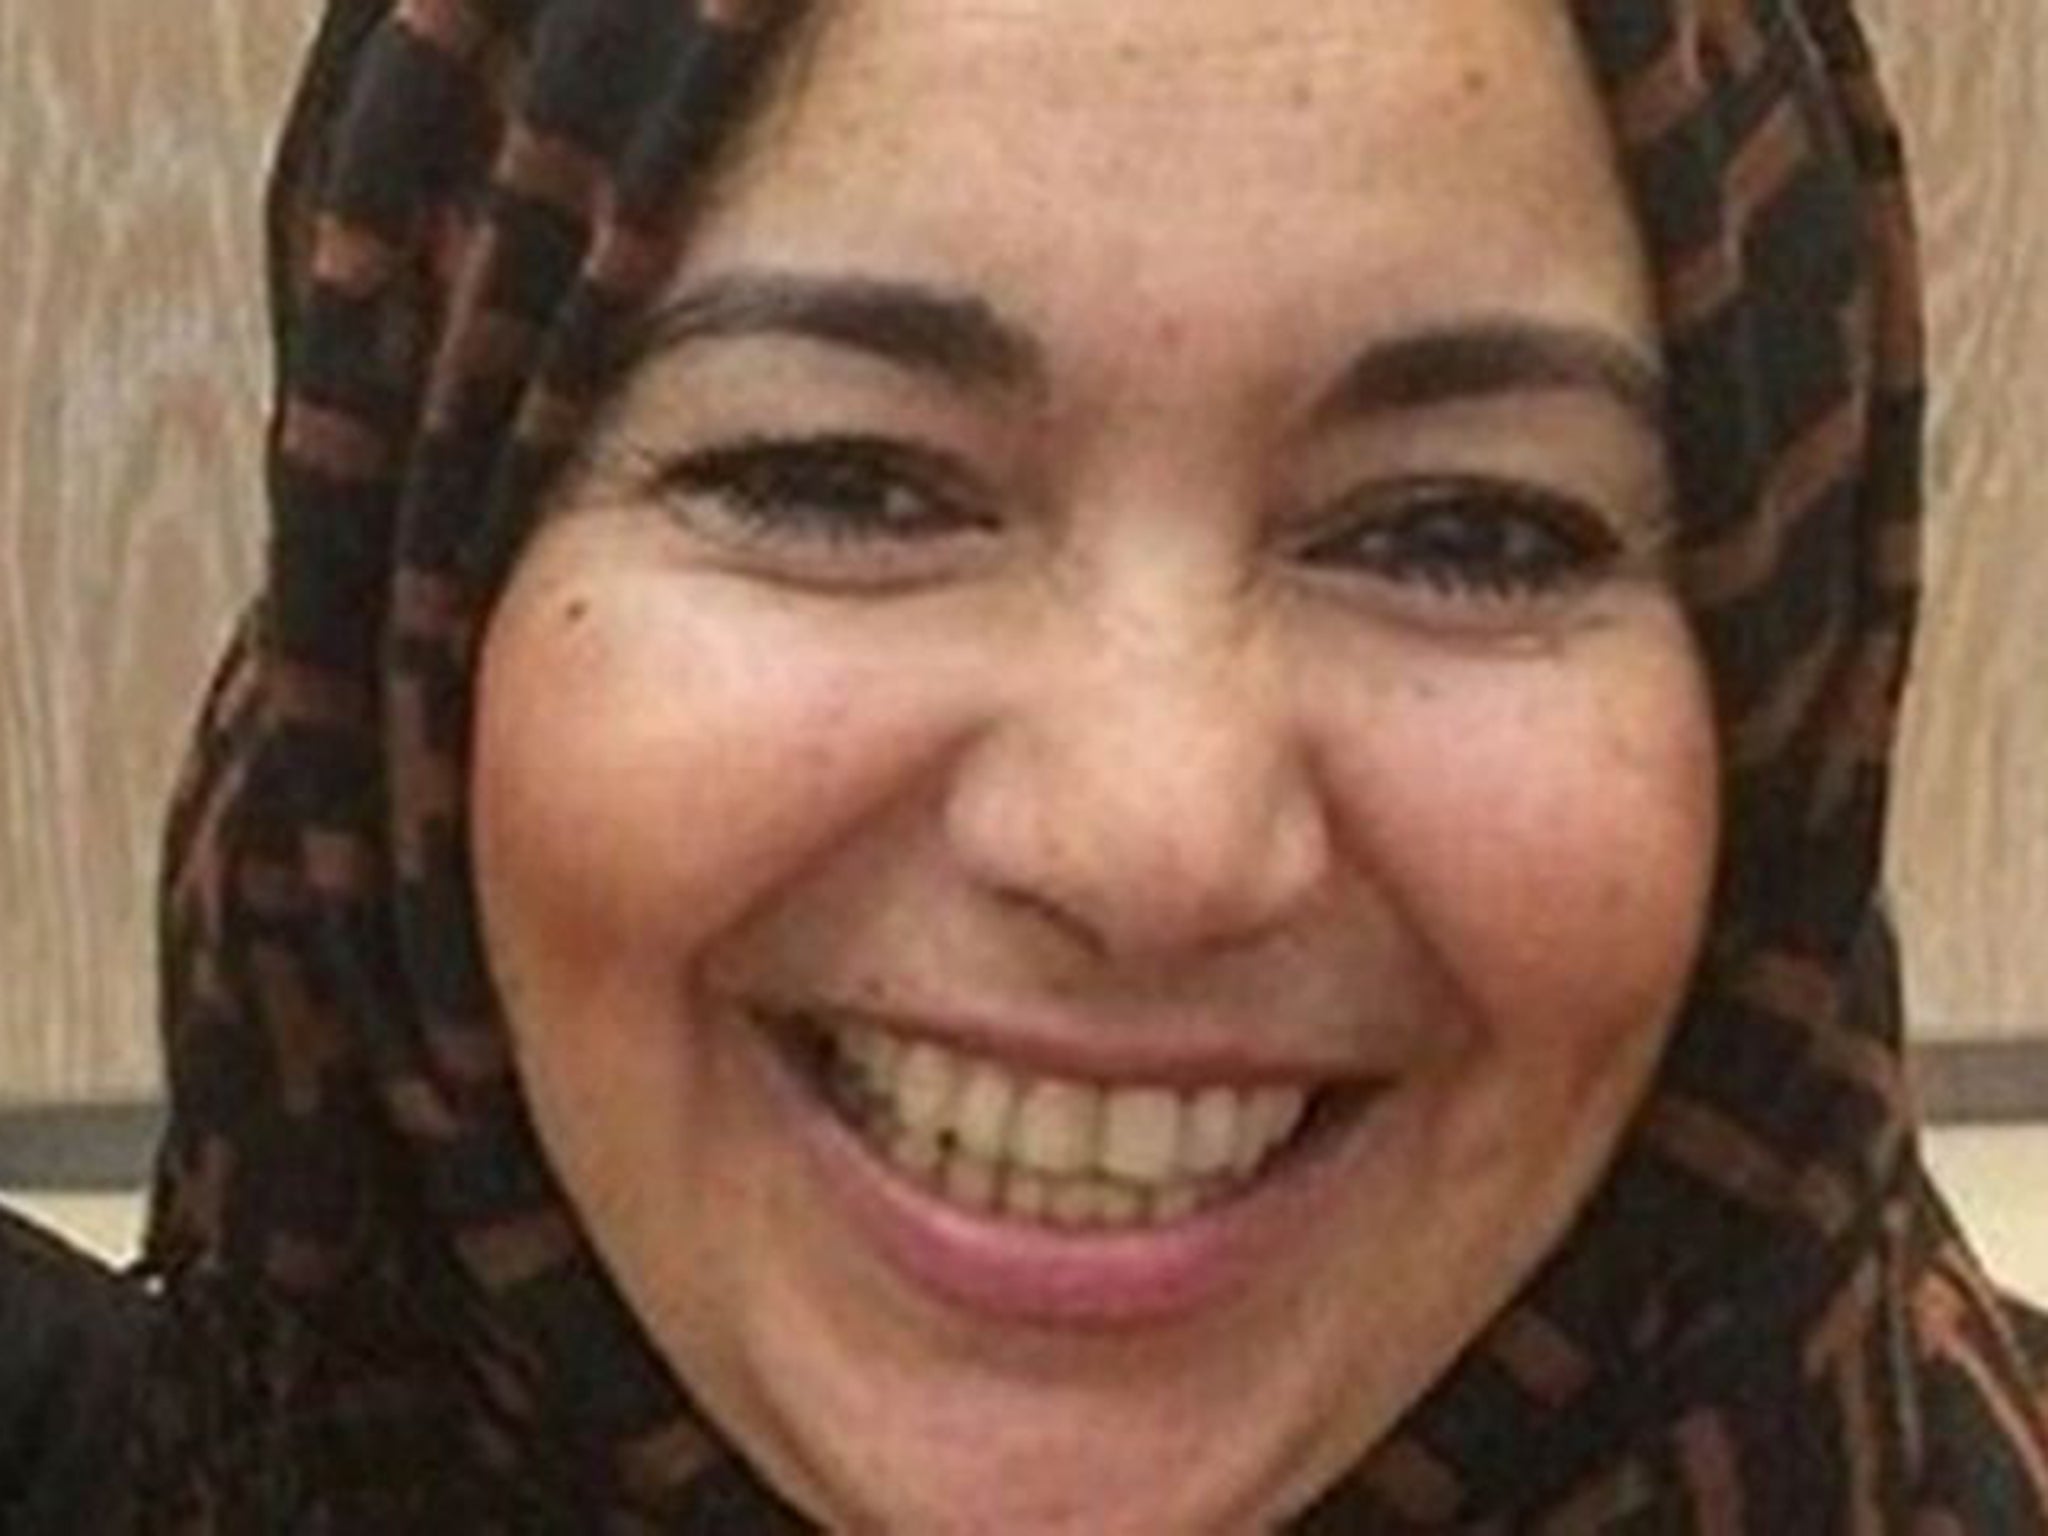 The family of Khadija Khalloufi?(above) have seen a traumatic situation made ‘even worse’